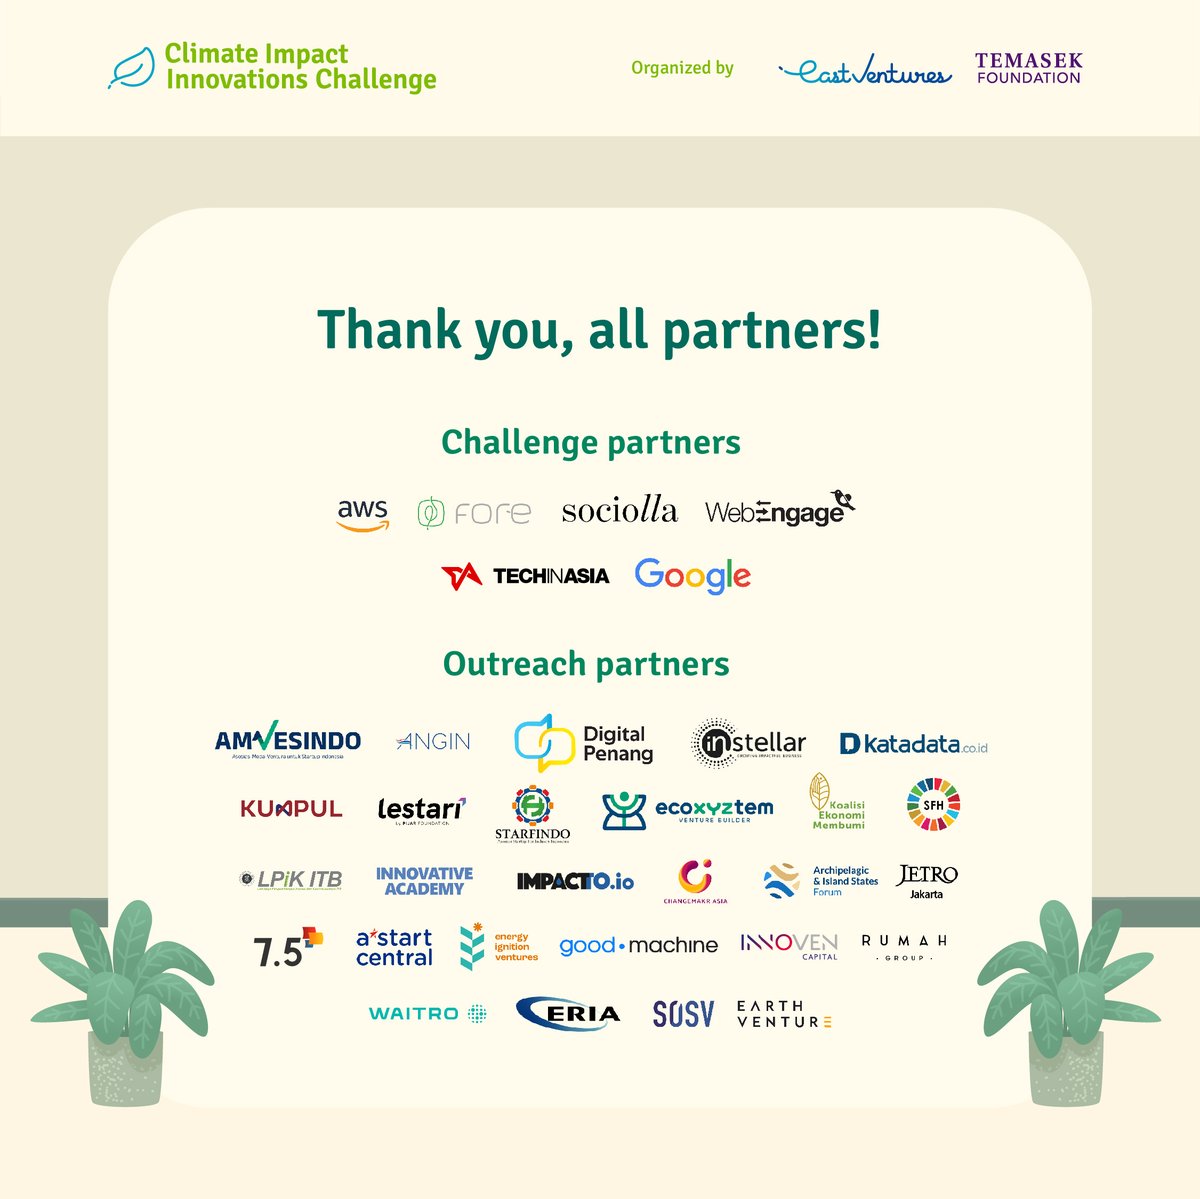 Climate Impact Innovations Challenge 2024 Partnership Opportunity👥

Interested to be part of us? Head to climateimpactinnovations.com/contact-us for more information.

The CIC 2024 is organized by @eastventures and @temasektoundation

#ClimatelmpactInnovationsChallenge #CIIC  #energytransistion